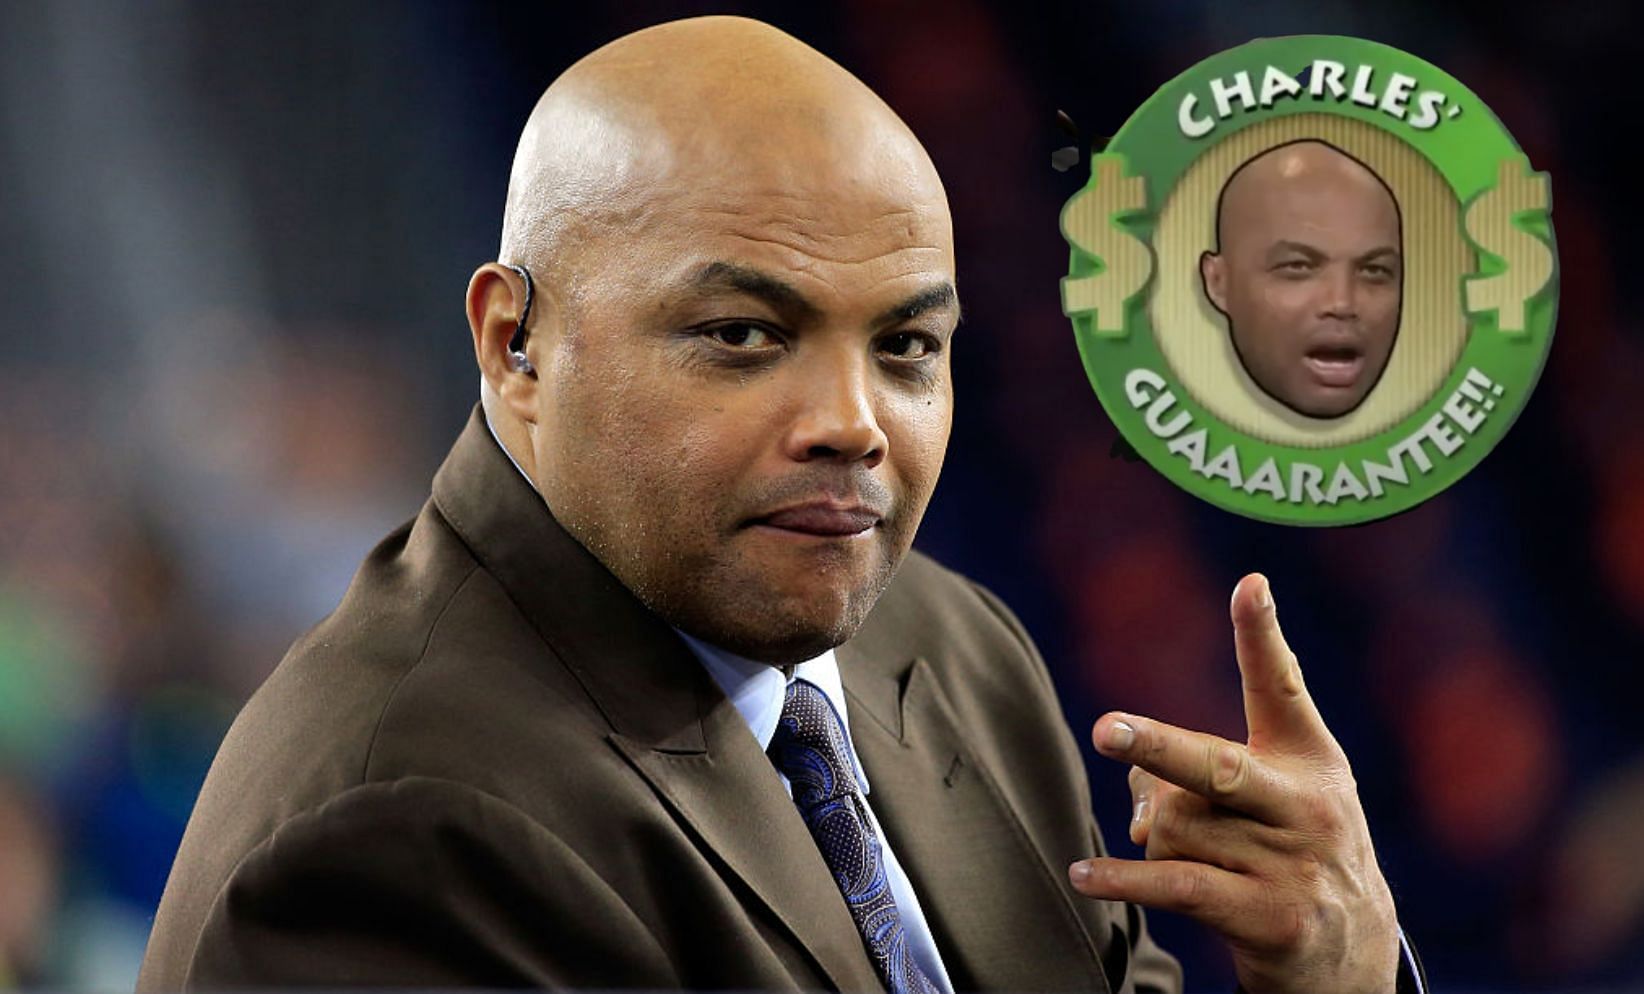 Charles Barkley guaranteed the Phoenix Suns to win the series against the New Orleans Pelicans. [Photo: Awful Announcing]